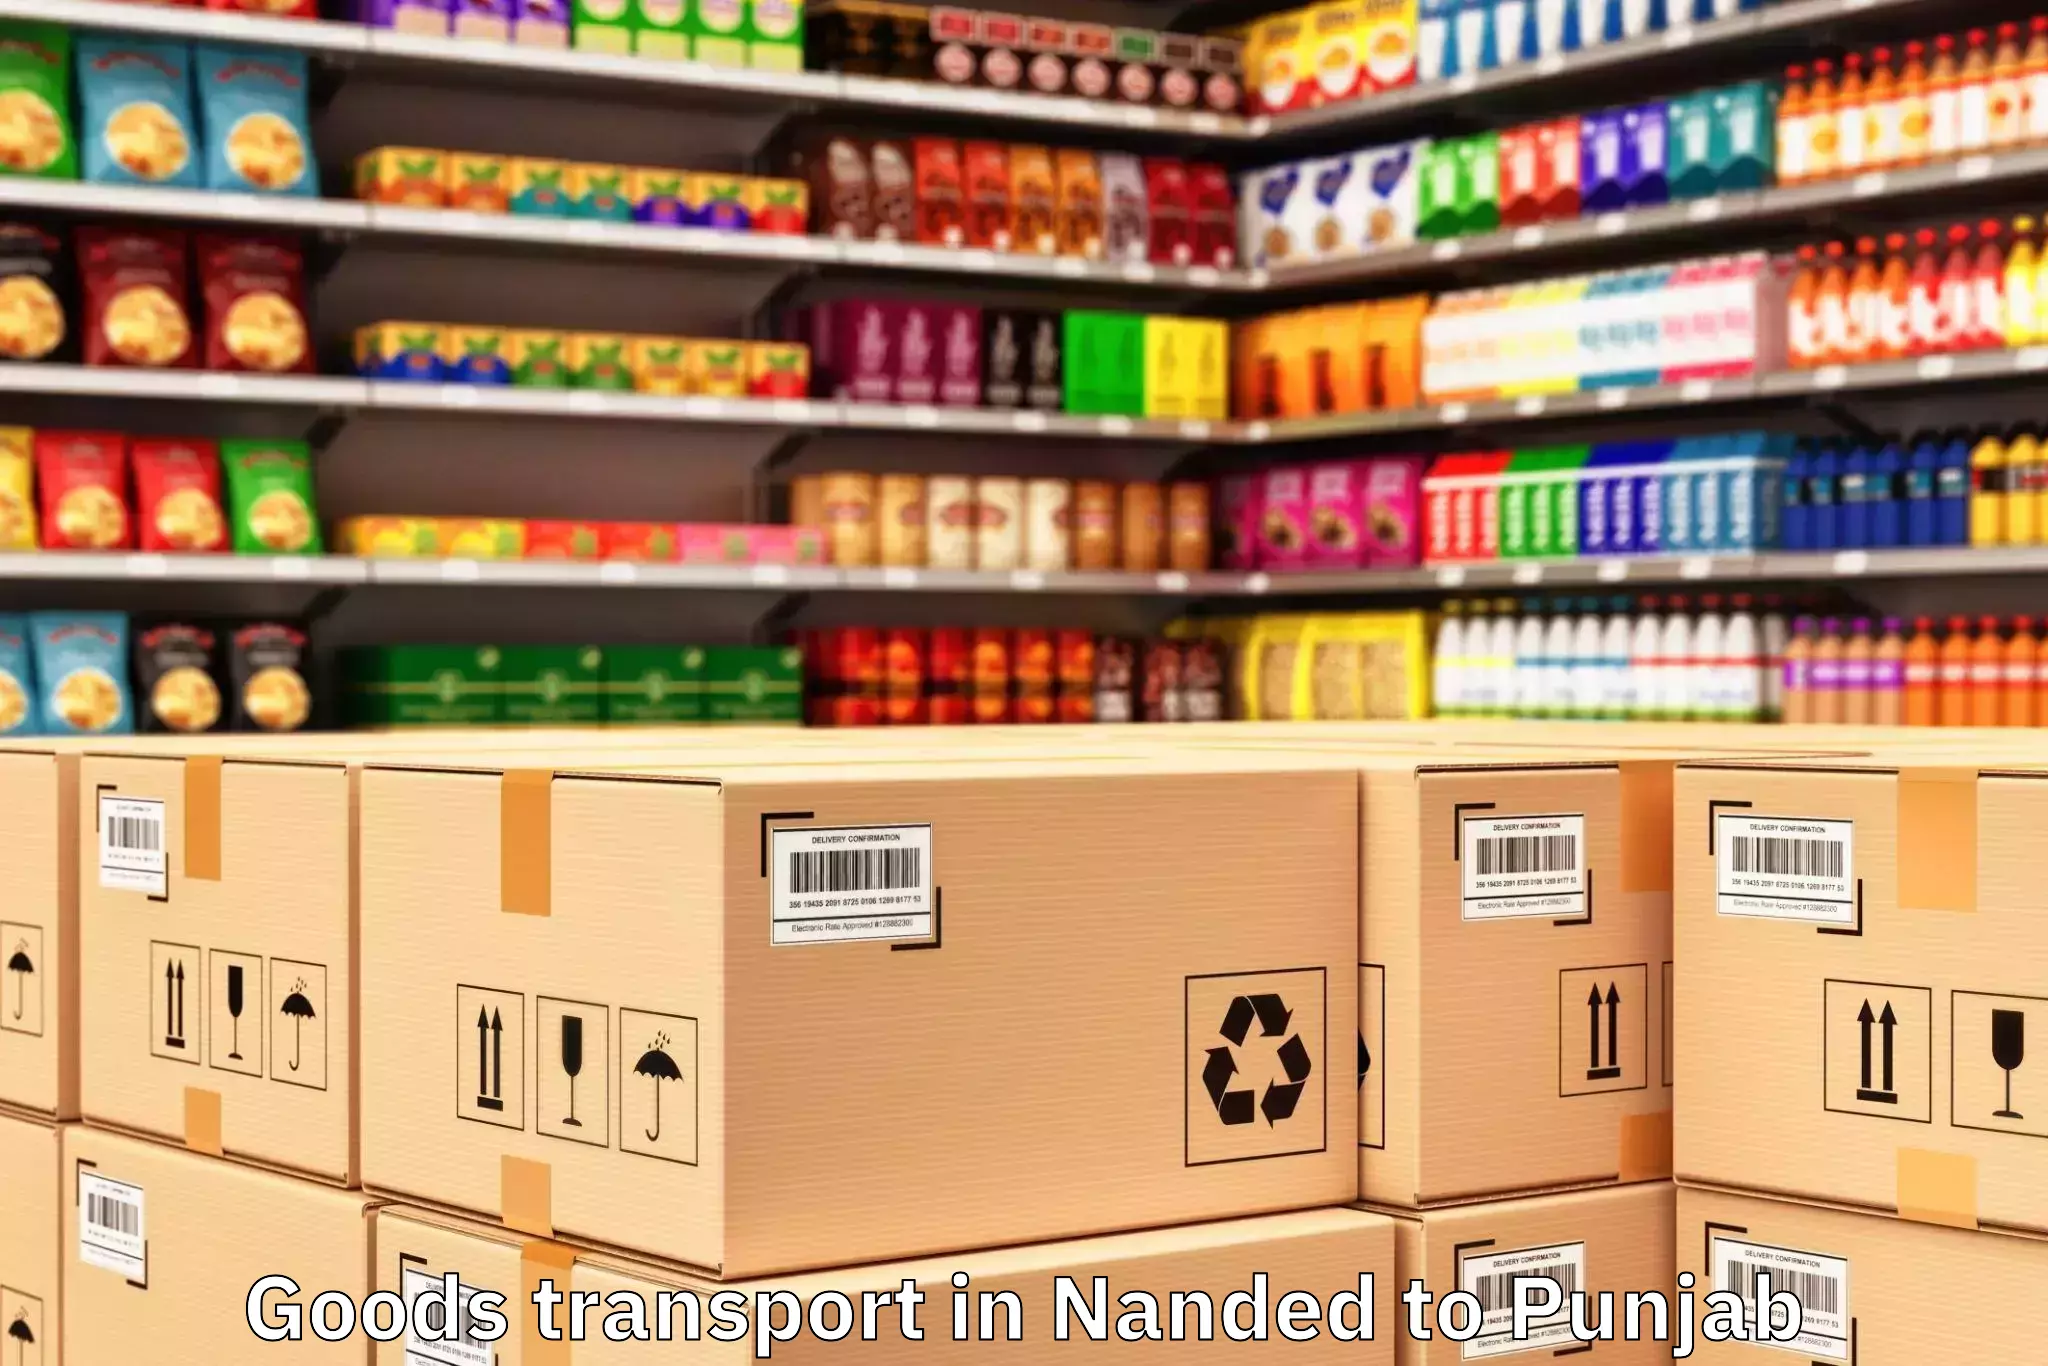 Professional Nanded to Cosmo Plaza Mall Goods Transport